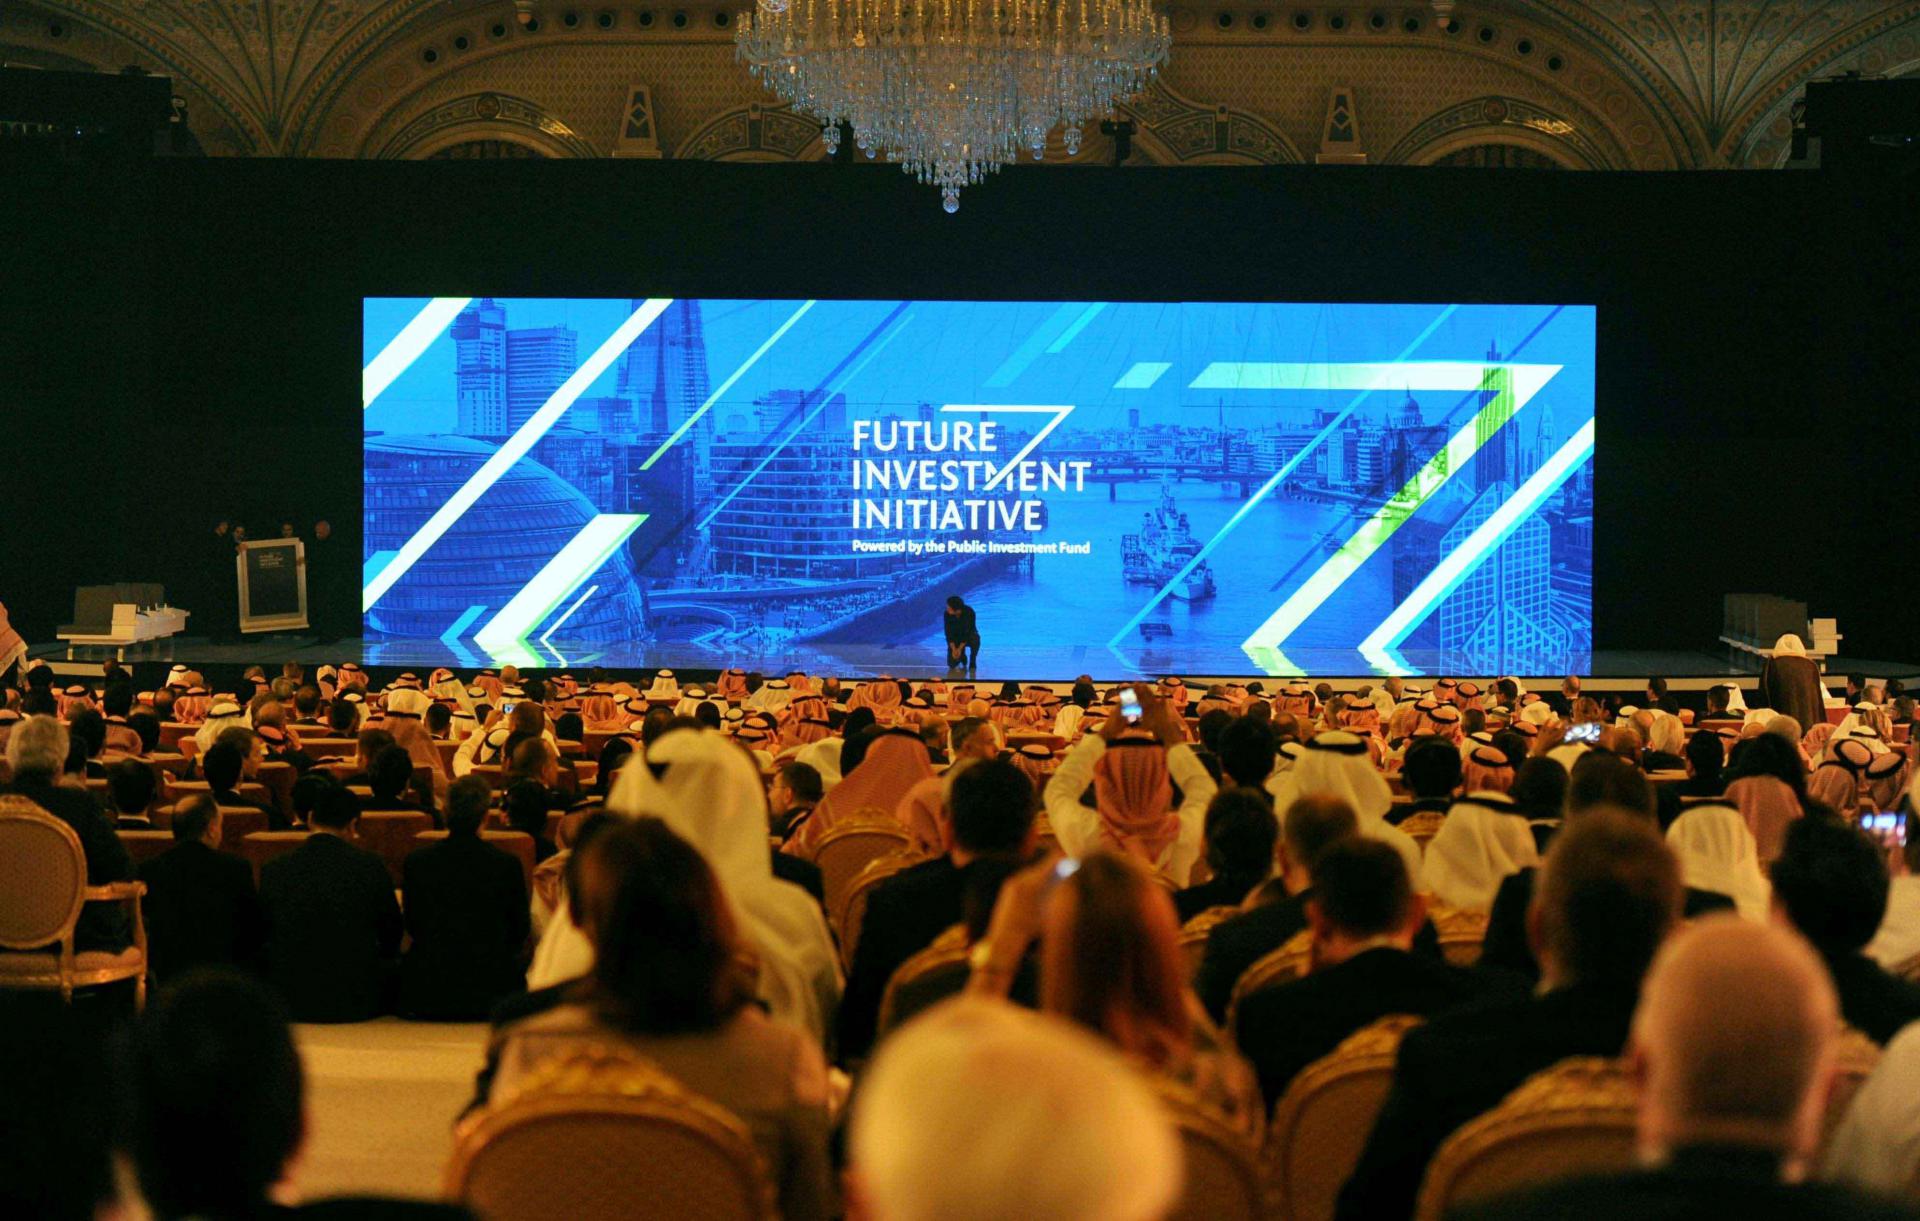 People attend the Future Investment Initiative (FII) conference in Riyadh last year